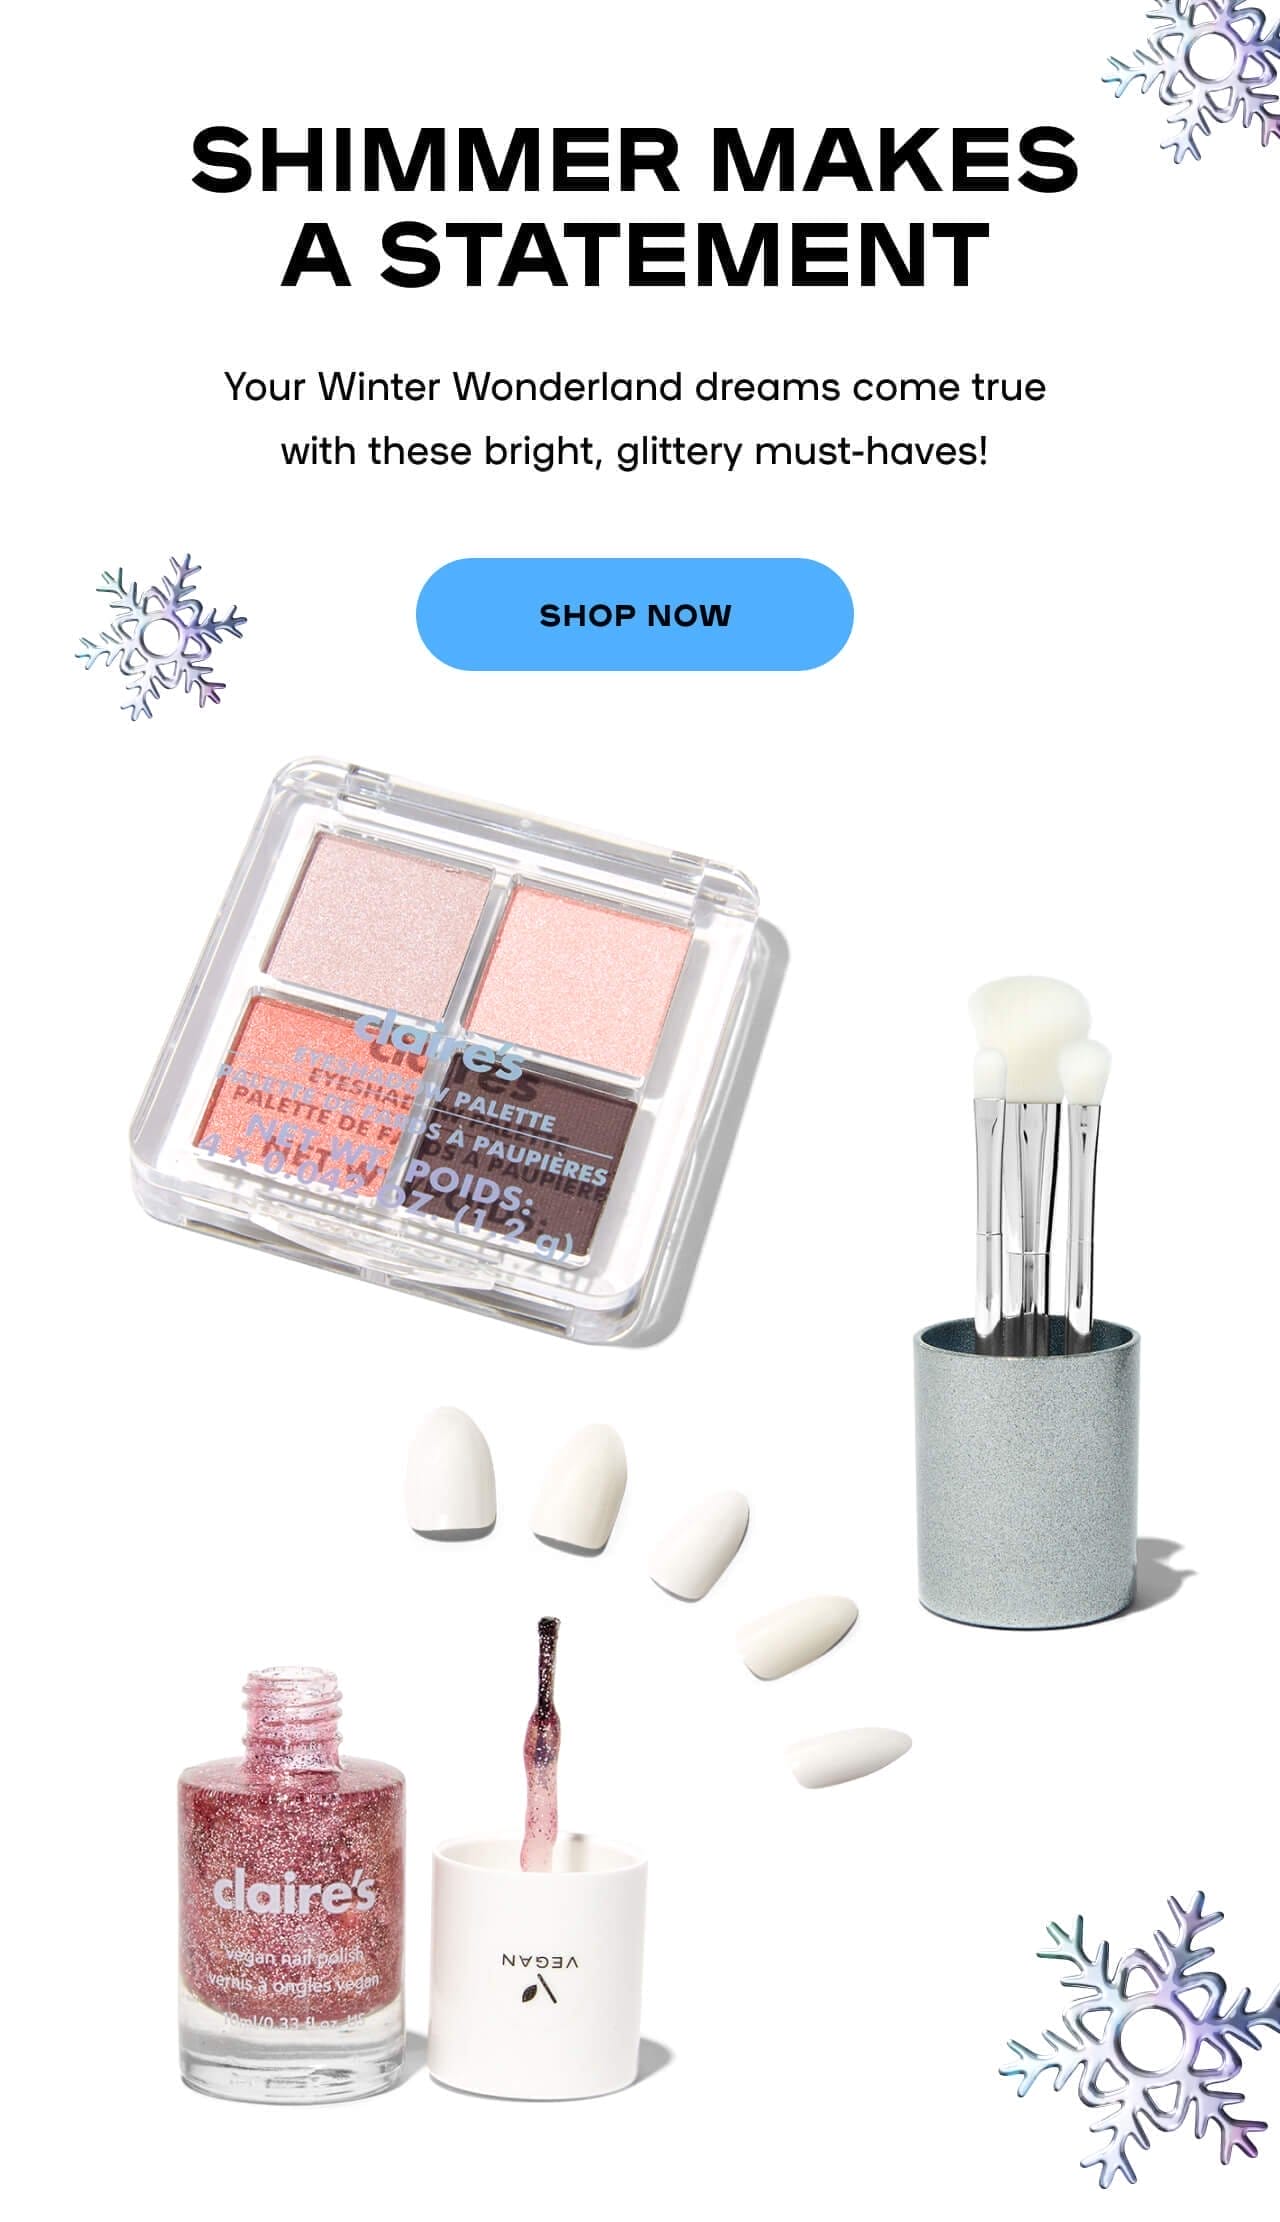 Shimmer Makes A Statement Your Winter Wonderland dreams come true with these bright, glittery must-haves!